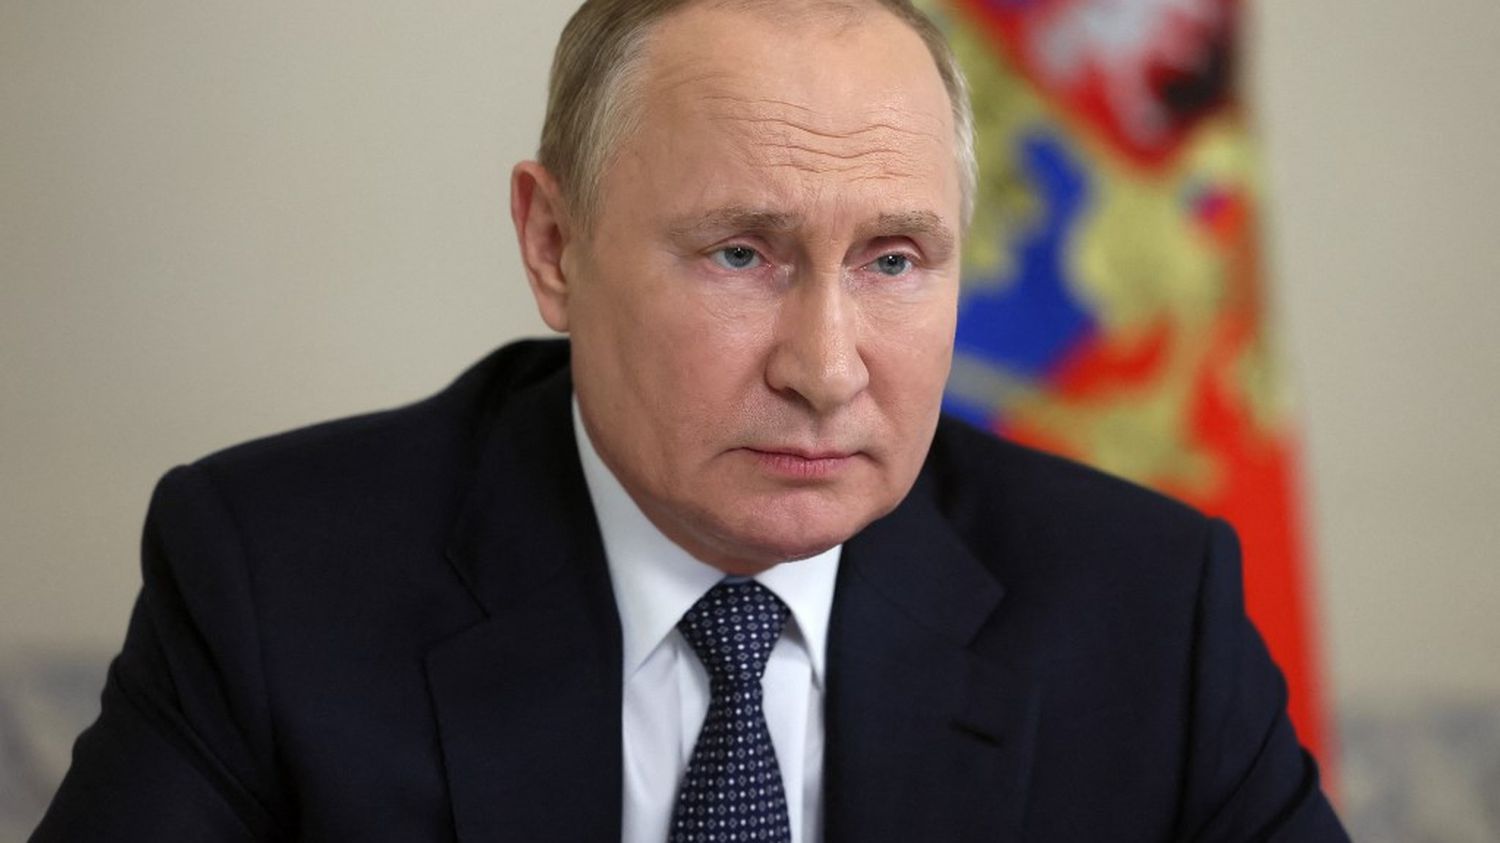 War in Ukraine: Russia has "not yet started serious things" in the country, says Vladimir Putin
